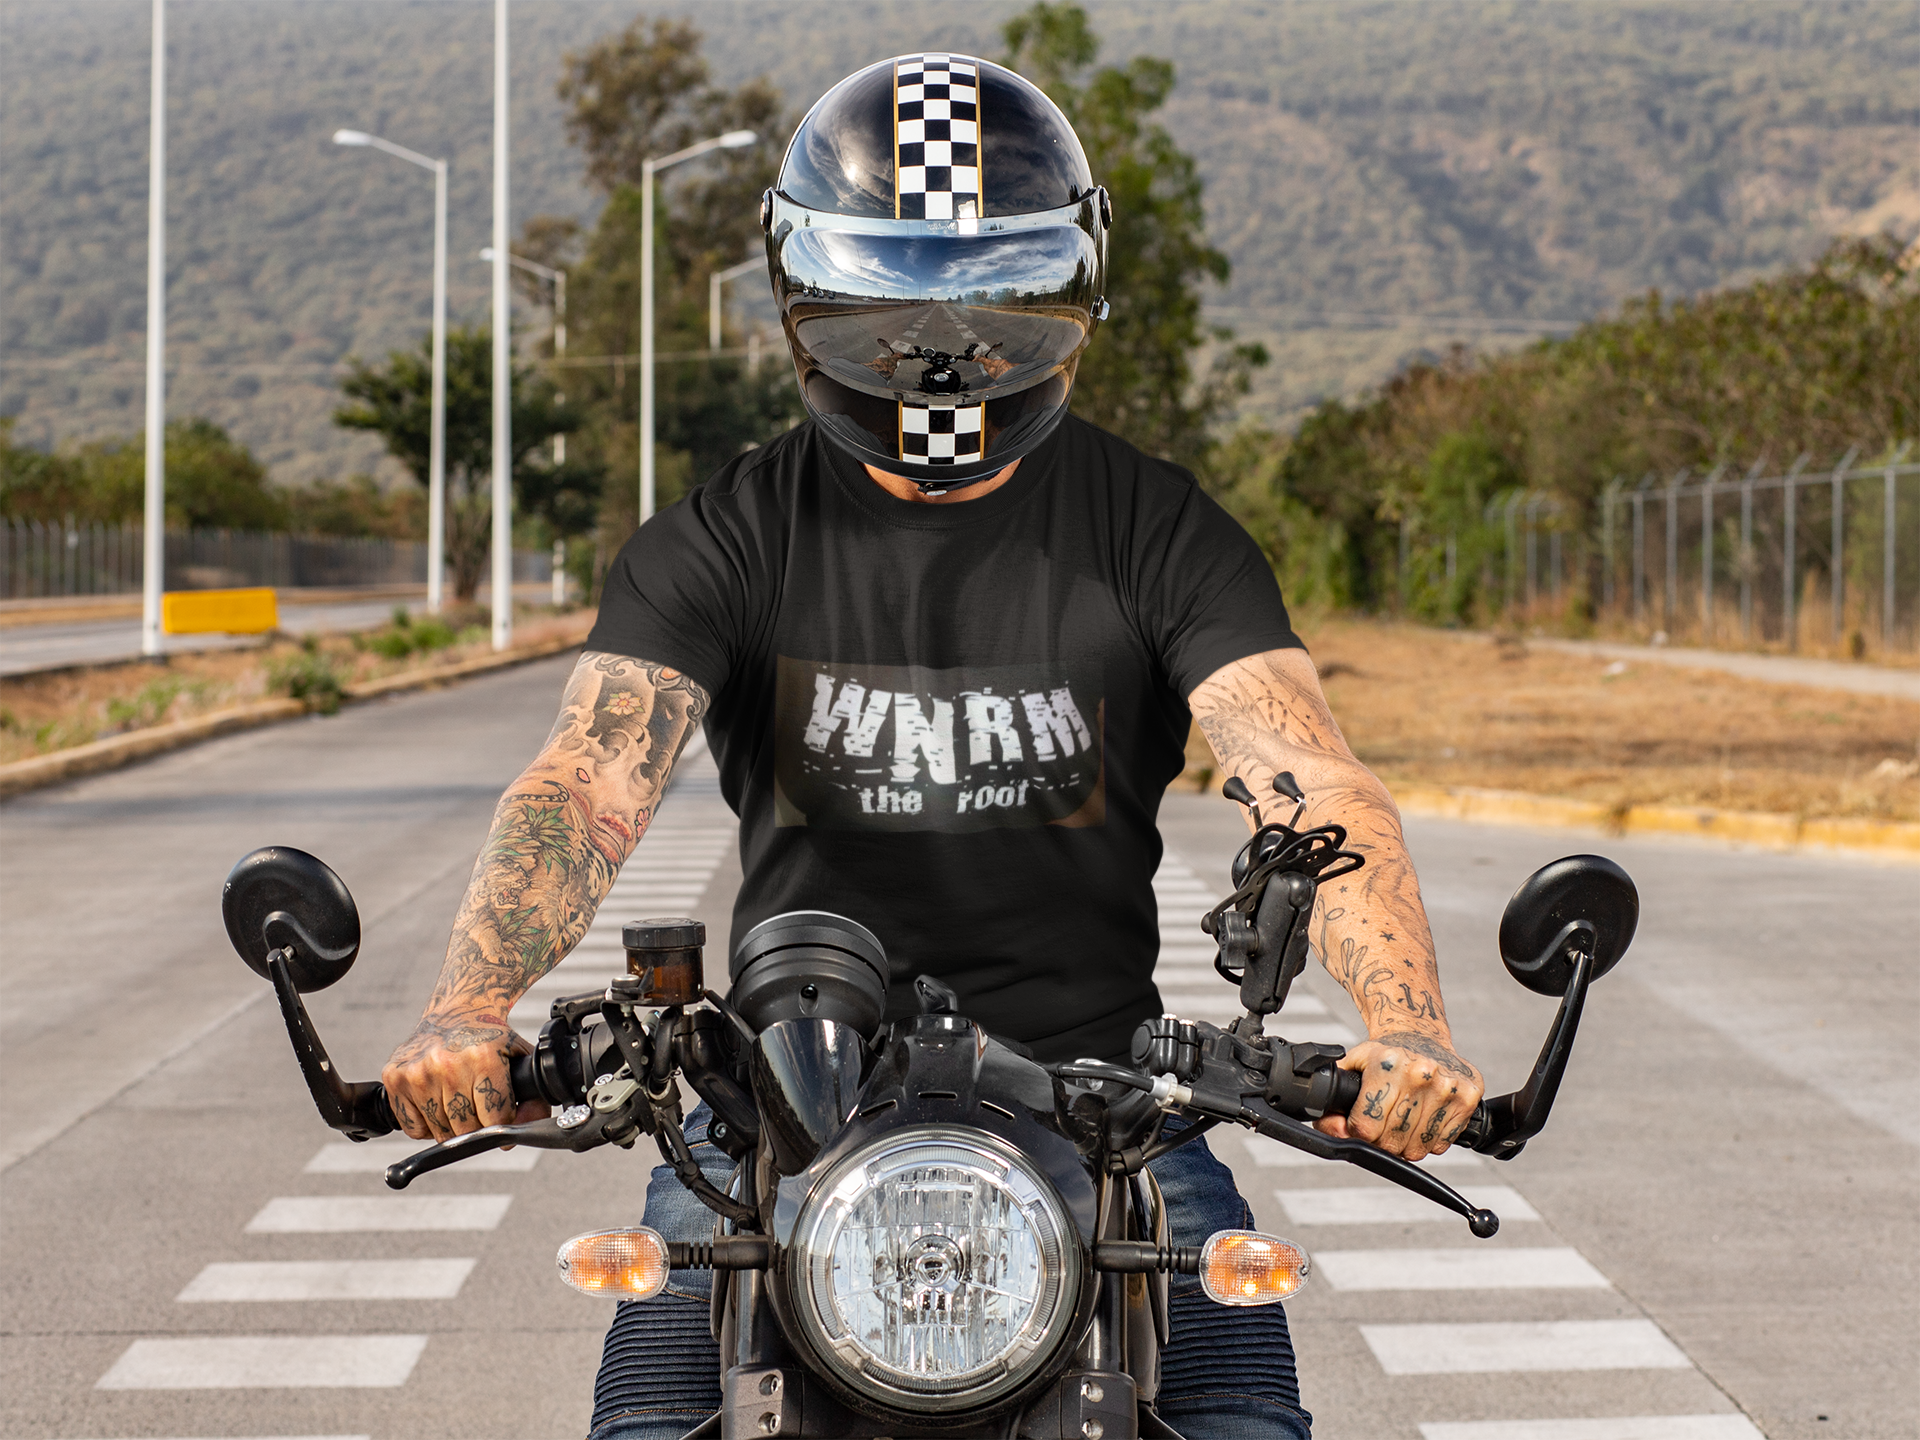 Man on a motorcycle wearing a OG WNRM Boob Tee with a helmet on, on a California road